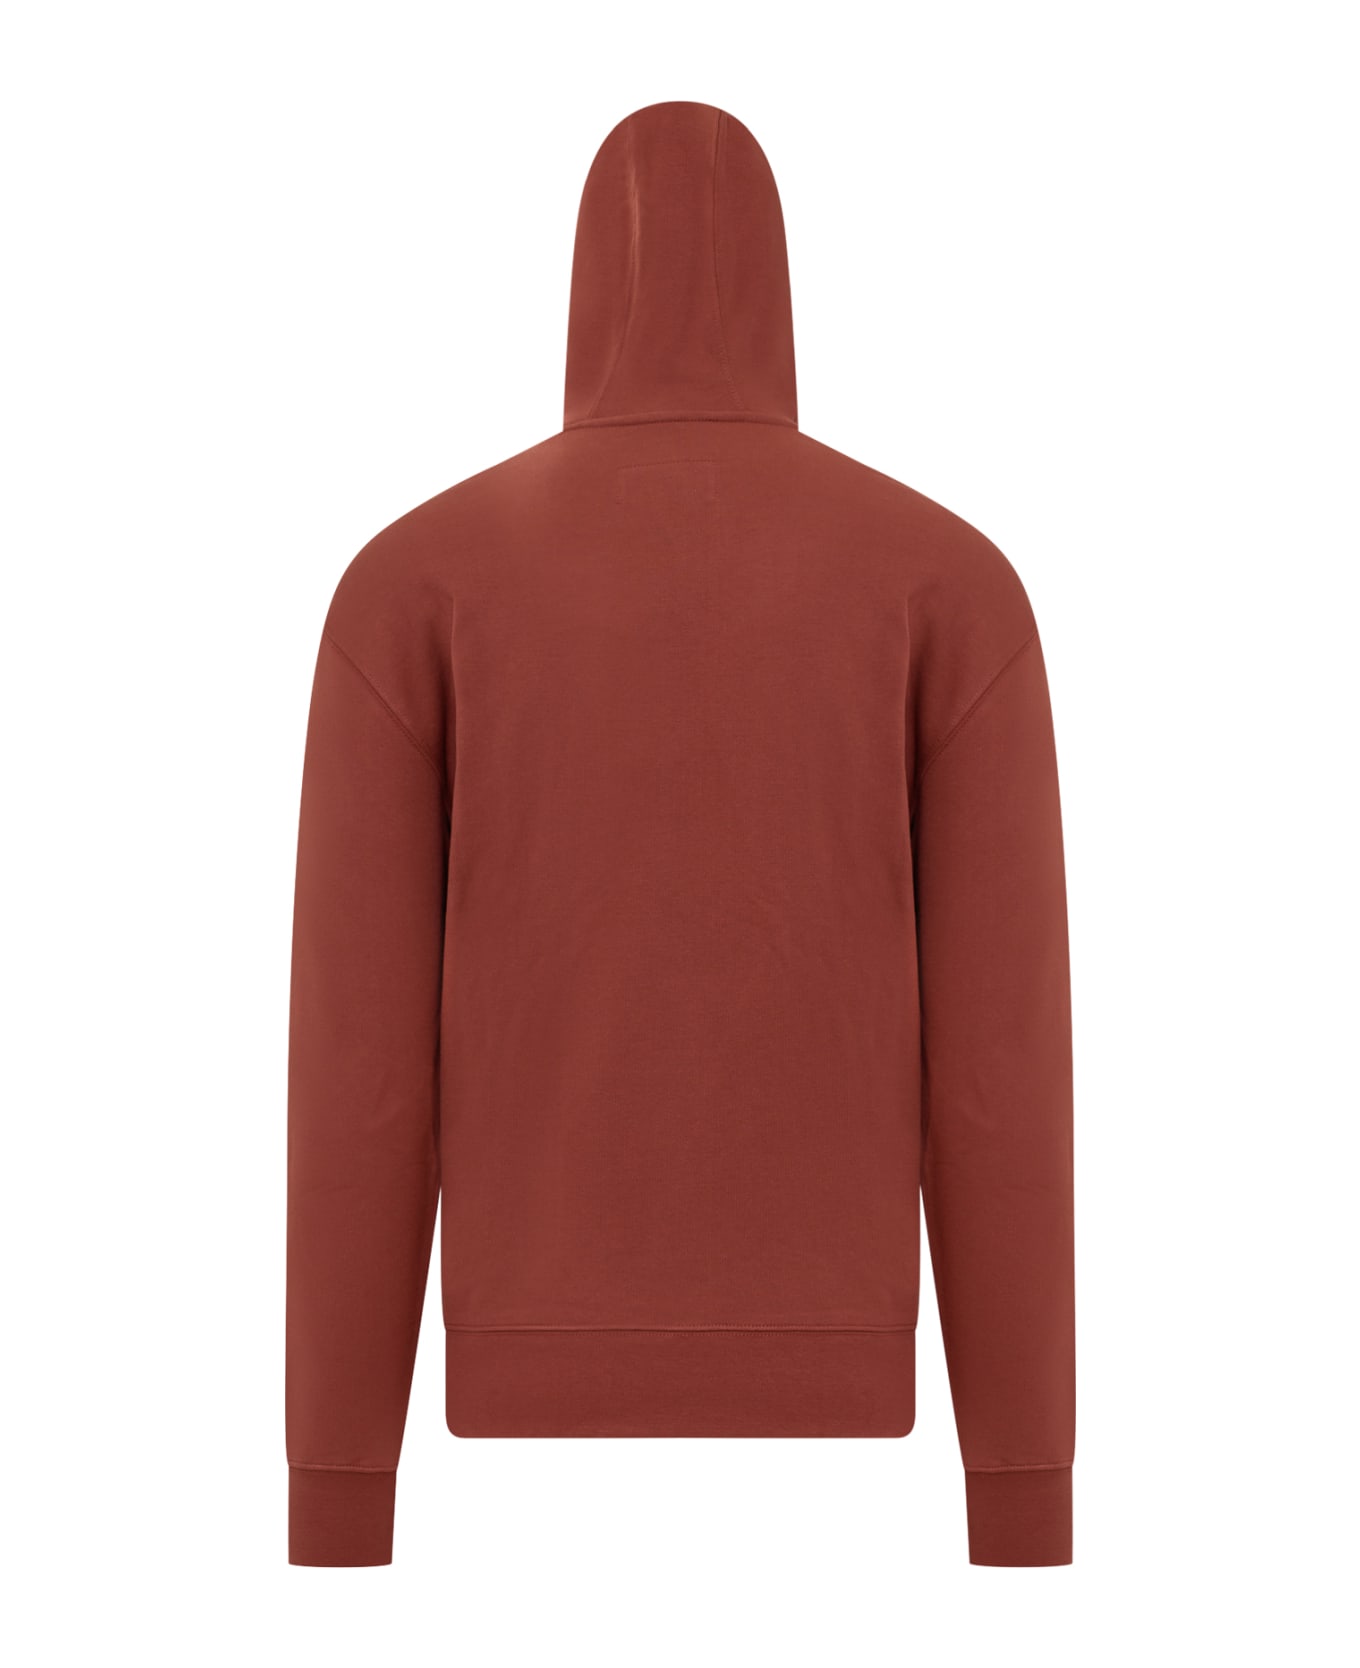 A-COLD-WALL Essential Hoodie - BURNT RED